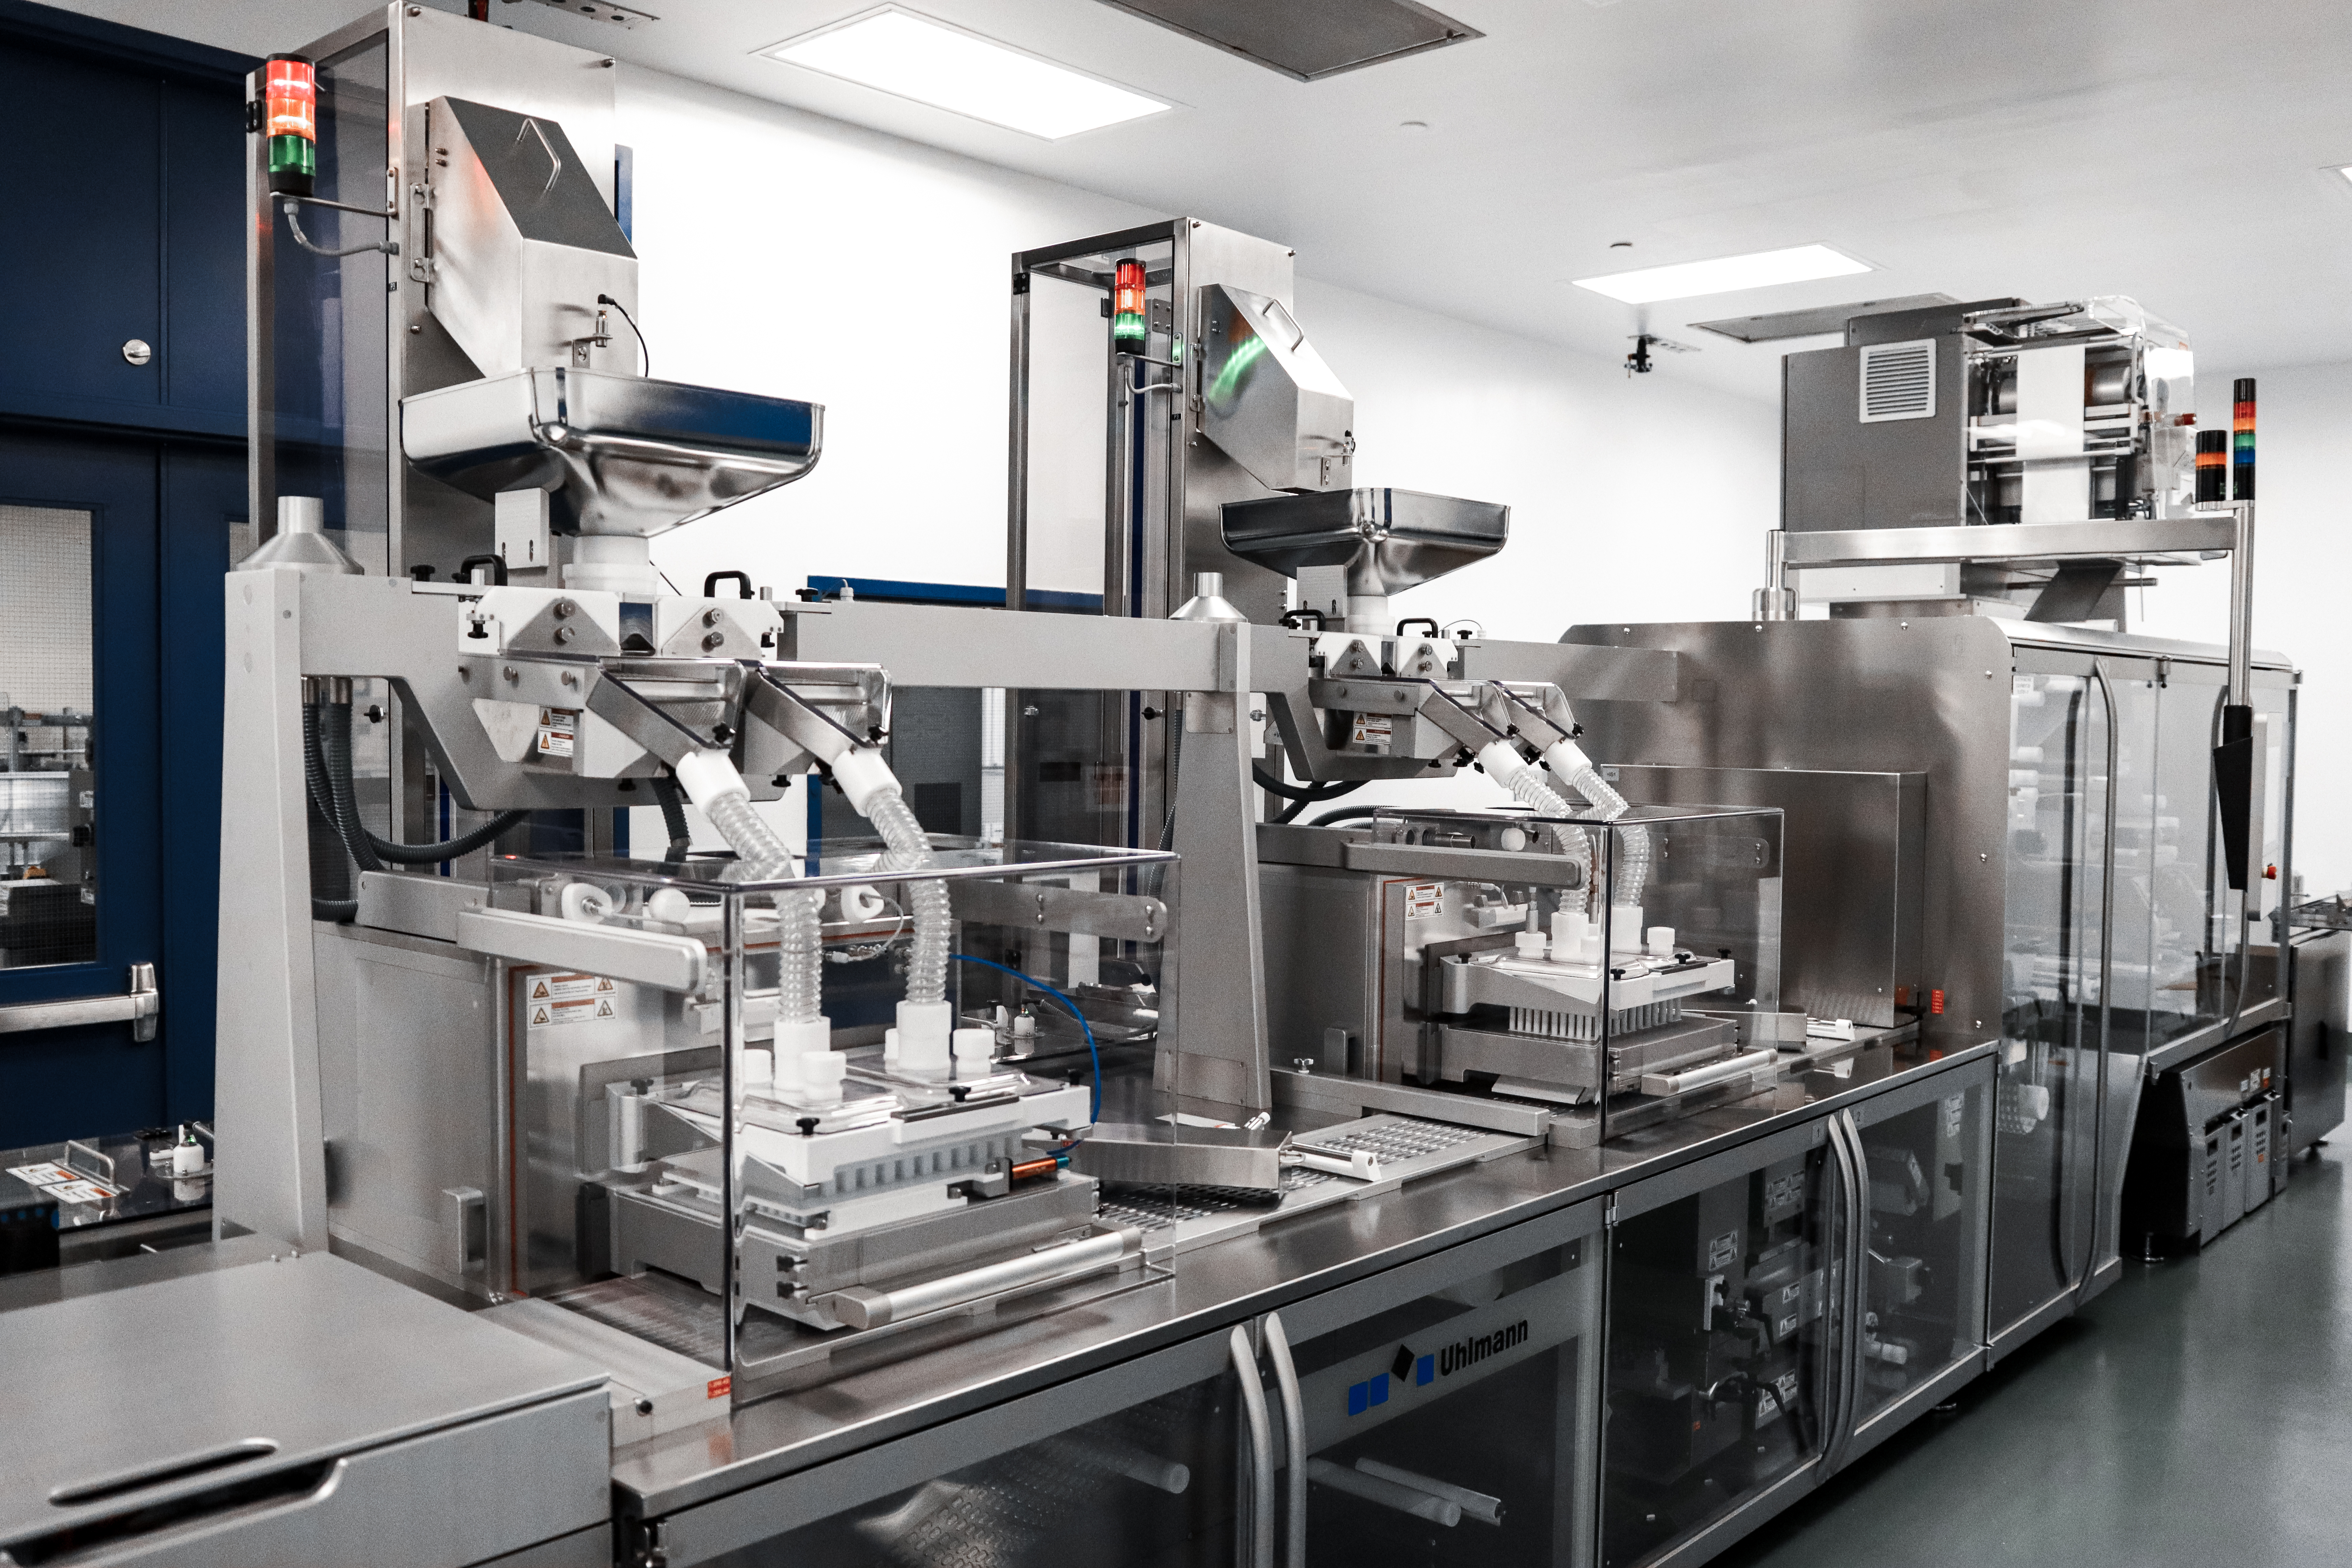 A modern Uhlmann blister packaging line in a clean, industrial setting, equipped to handle solid dose medications. The machine features various modules for creating and sealing blister packs, showcasing its versatility in producing multiple blister formats.